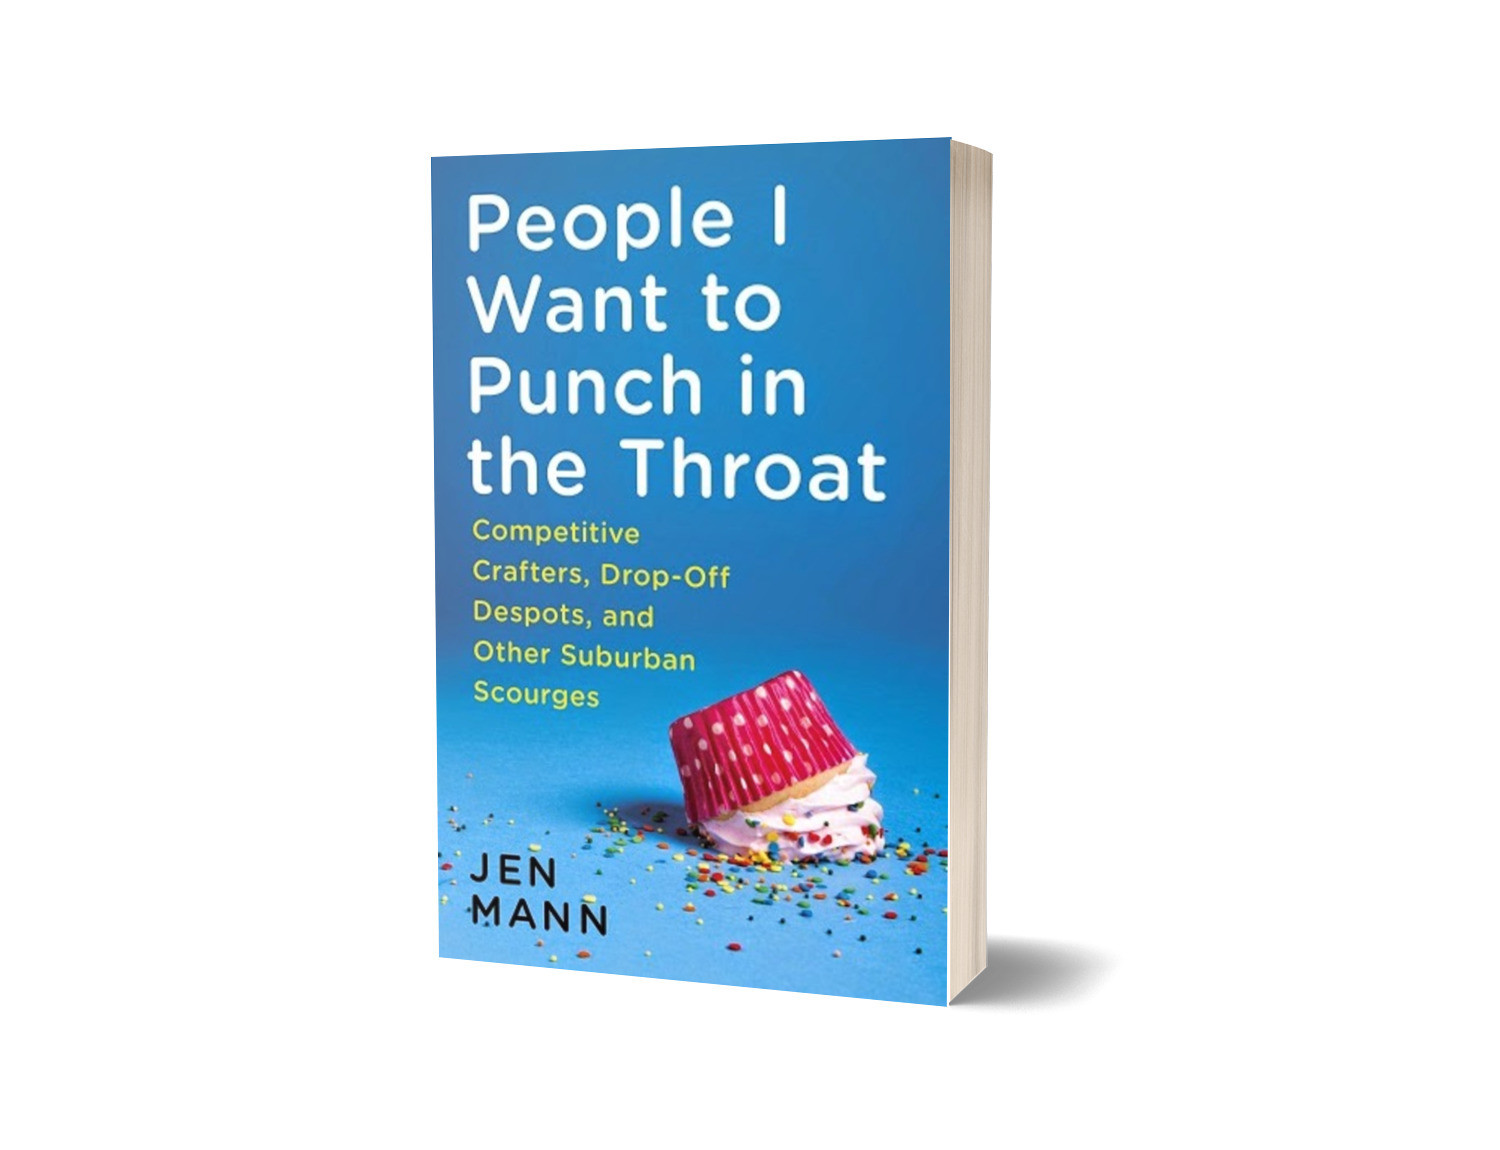 People I Want to Punch in the Throat: Competitive Crafters, Drop-off Despots, and Other Suburban Scourges - Signed Copy